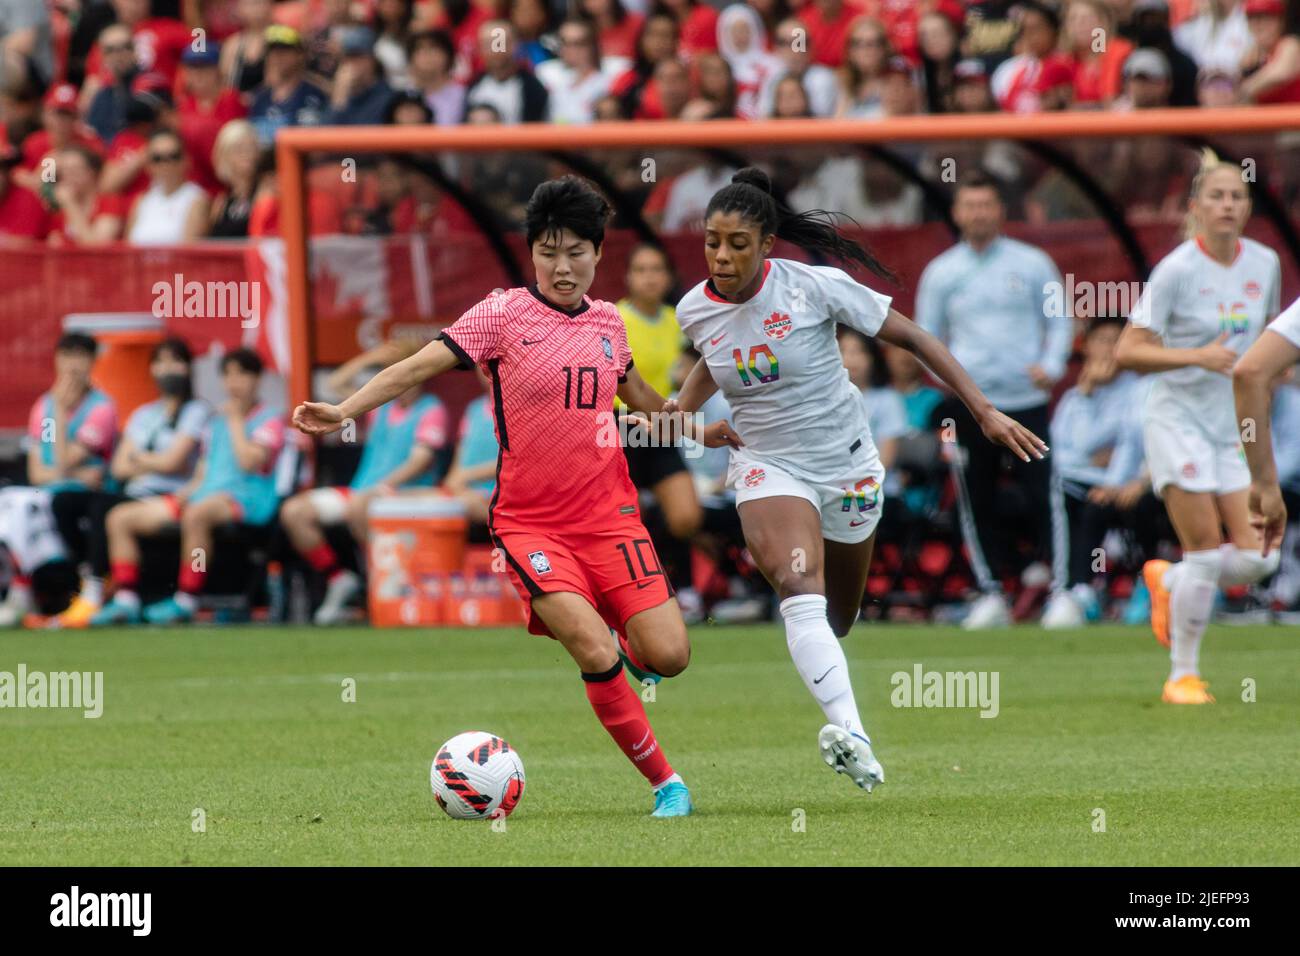 Toronto, Canada, June 26, 2022: Ji So-yun (left) of Team Korea Republic in action against Ashley Lawrence (right) of Team Canada during the International Friendly Match at BMO Field in Toronto, Canada. Canada and Korea draw 0-0. Credit: Phamai Techaphan/Alamy Live News Stock Photo